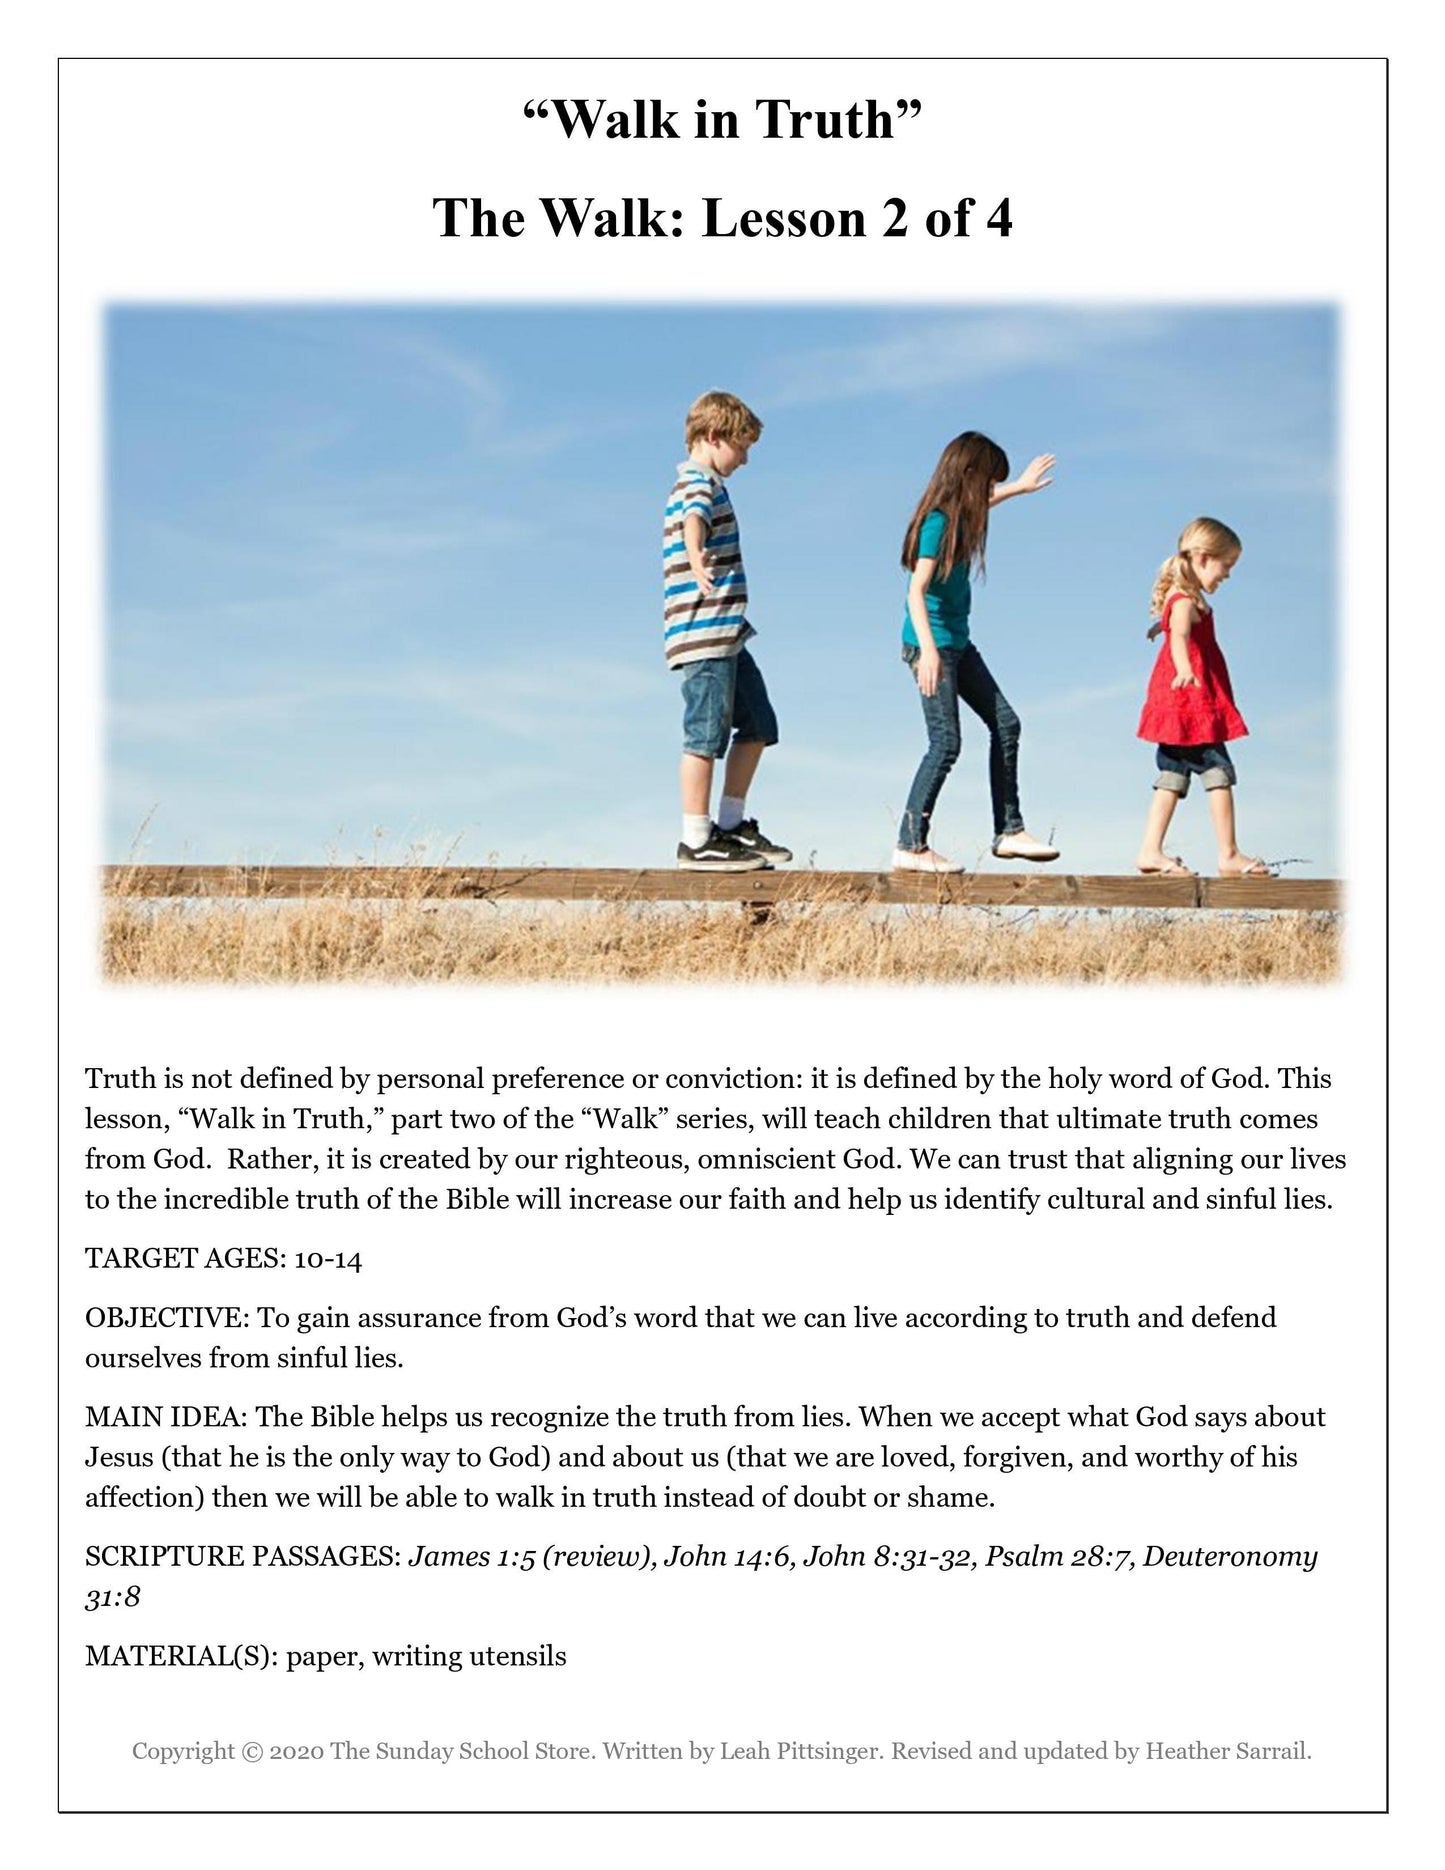 The Walk: 4-Week Study on Following Jesus (download only) - Sunday School Store 